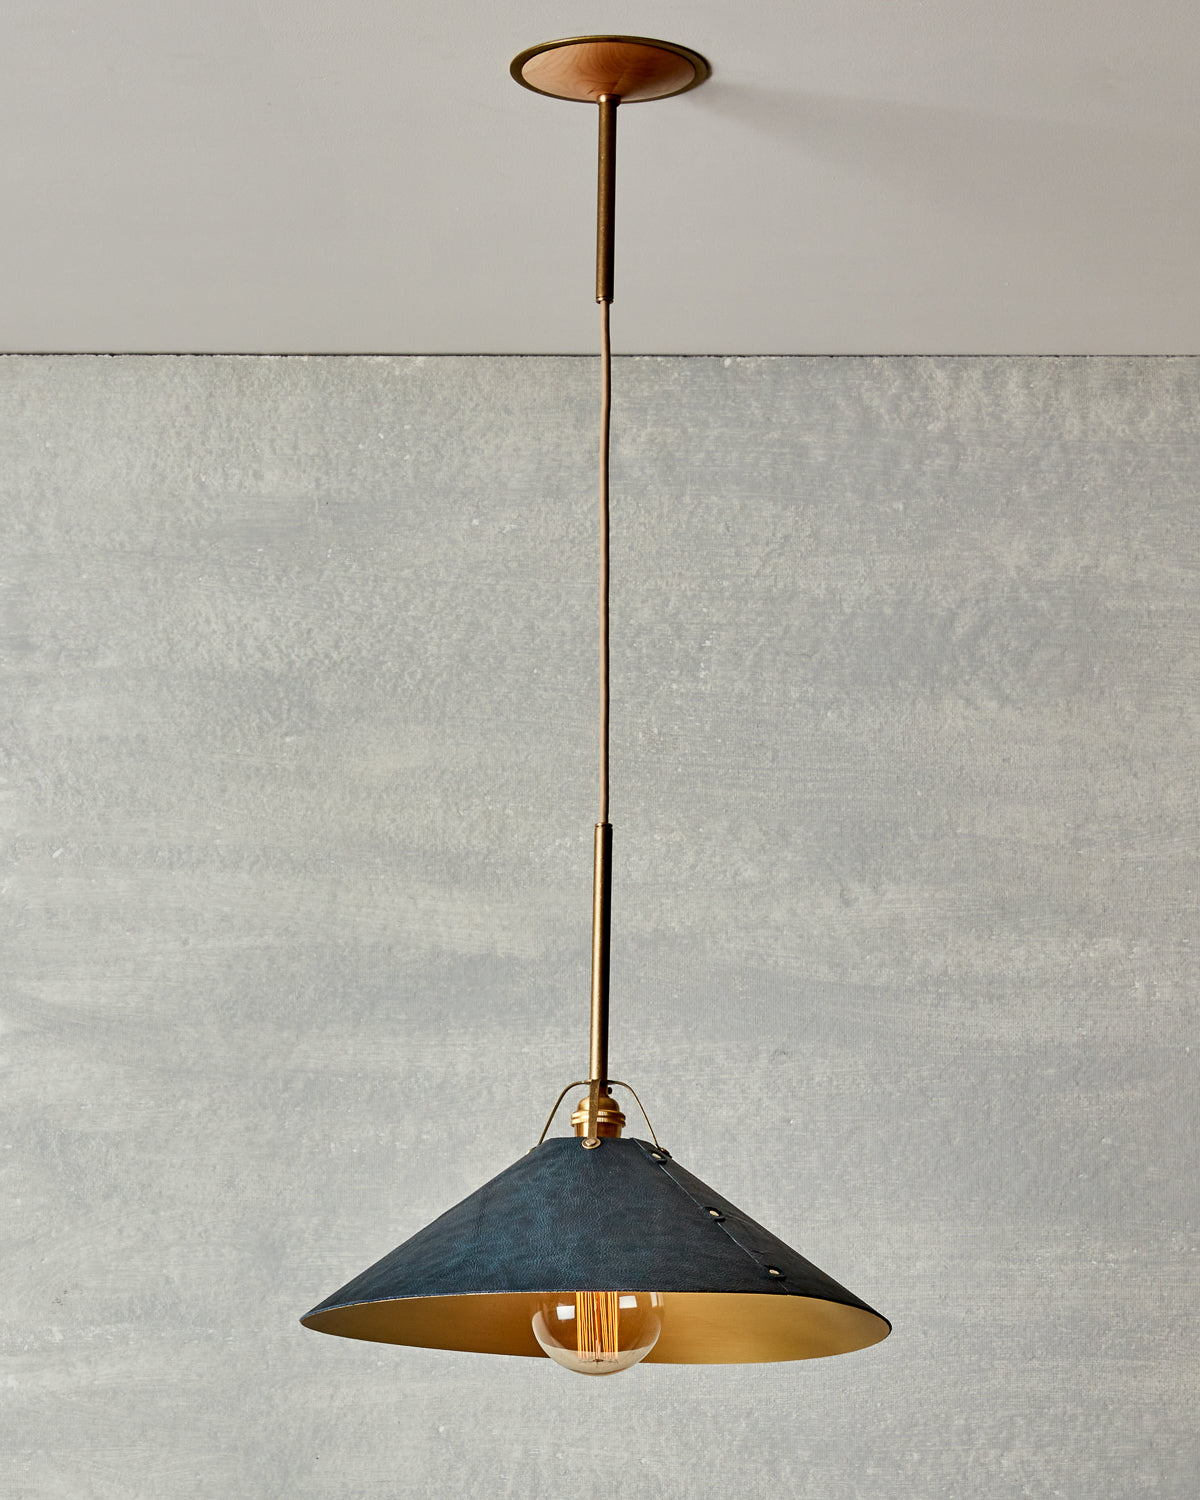 Navy blue leather and brass ceiling pendant light. Made by RTO Lighting in Philadelphia. Hardwired light fixture. Simple interior design, made in the USA.